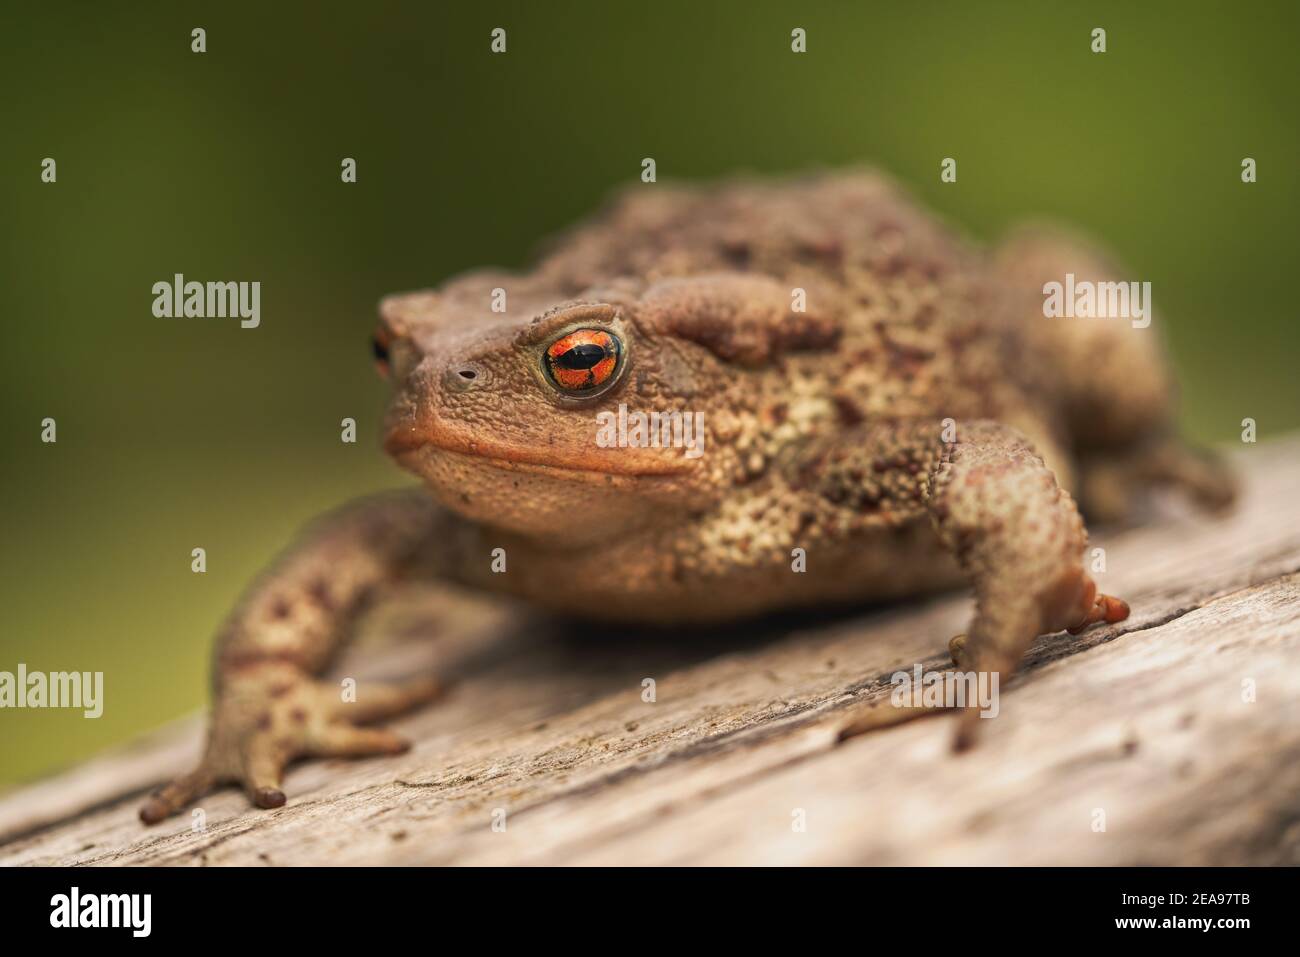 Side close up shot of European toad (Bufo bufo) sitting on a tree log isolated on bright green background Stock Photo